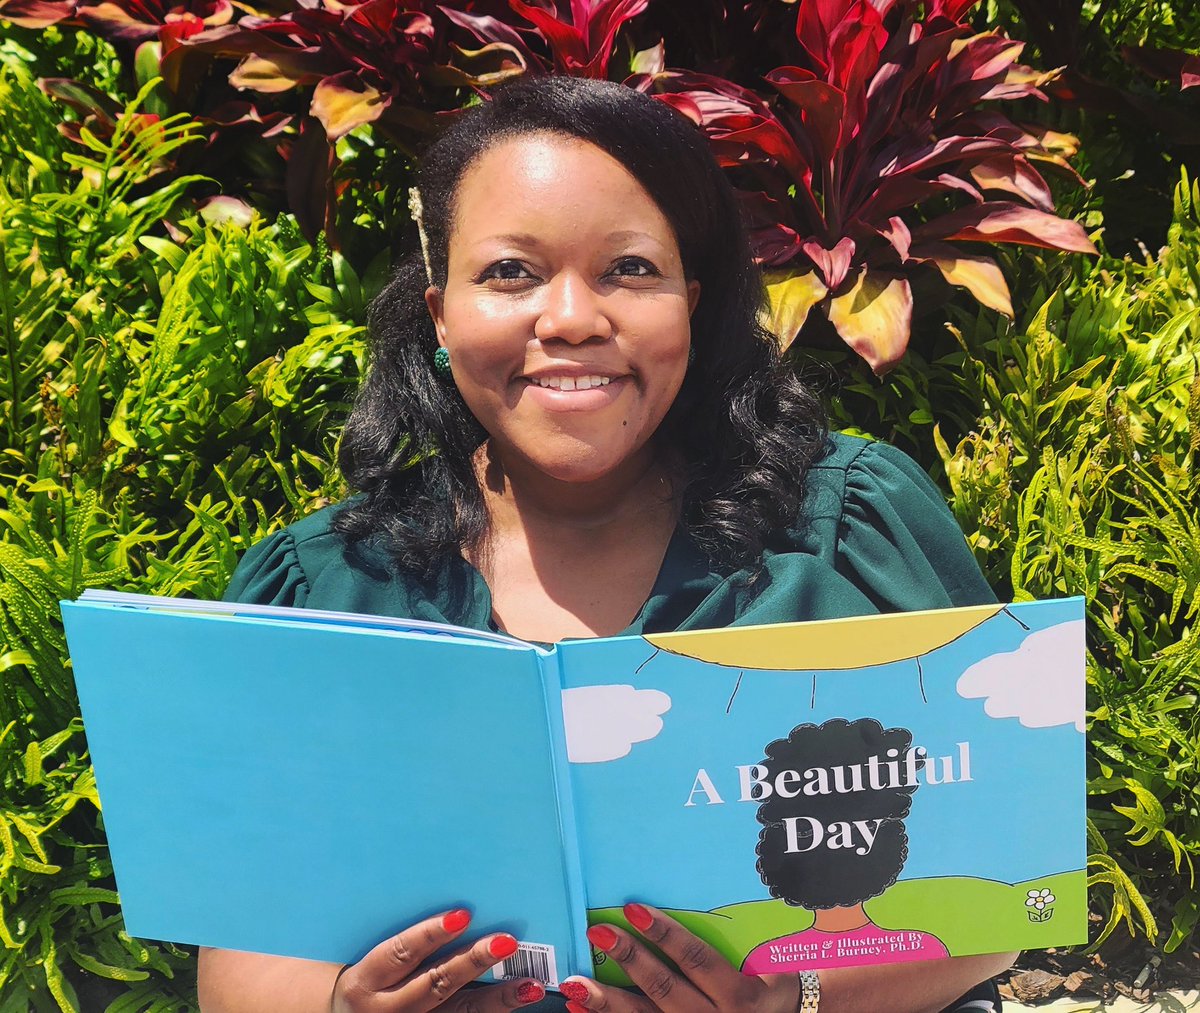 Come join us this Saturday at 11am as Dr. Sherria L. Burney, author of “A beautiful Day” , amongst other titles,  hosts Saturday story time! #storytime #authorevent #storytime #barnesandnoblemacon #barnesandnoble #bnmacon